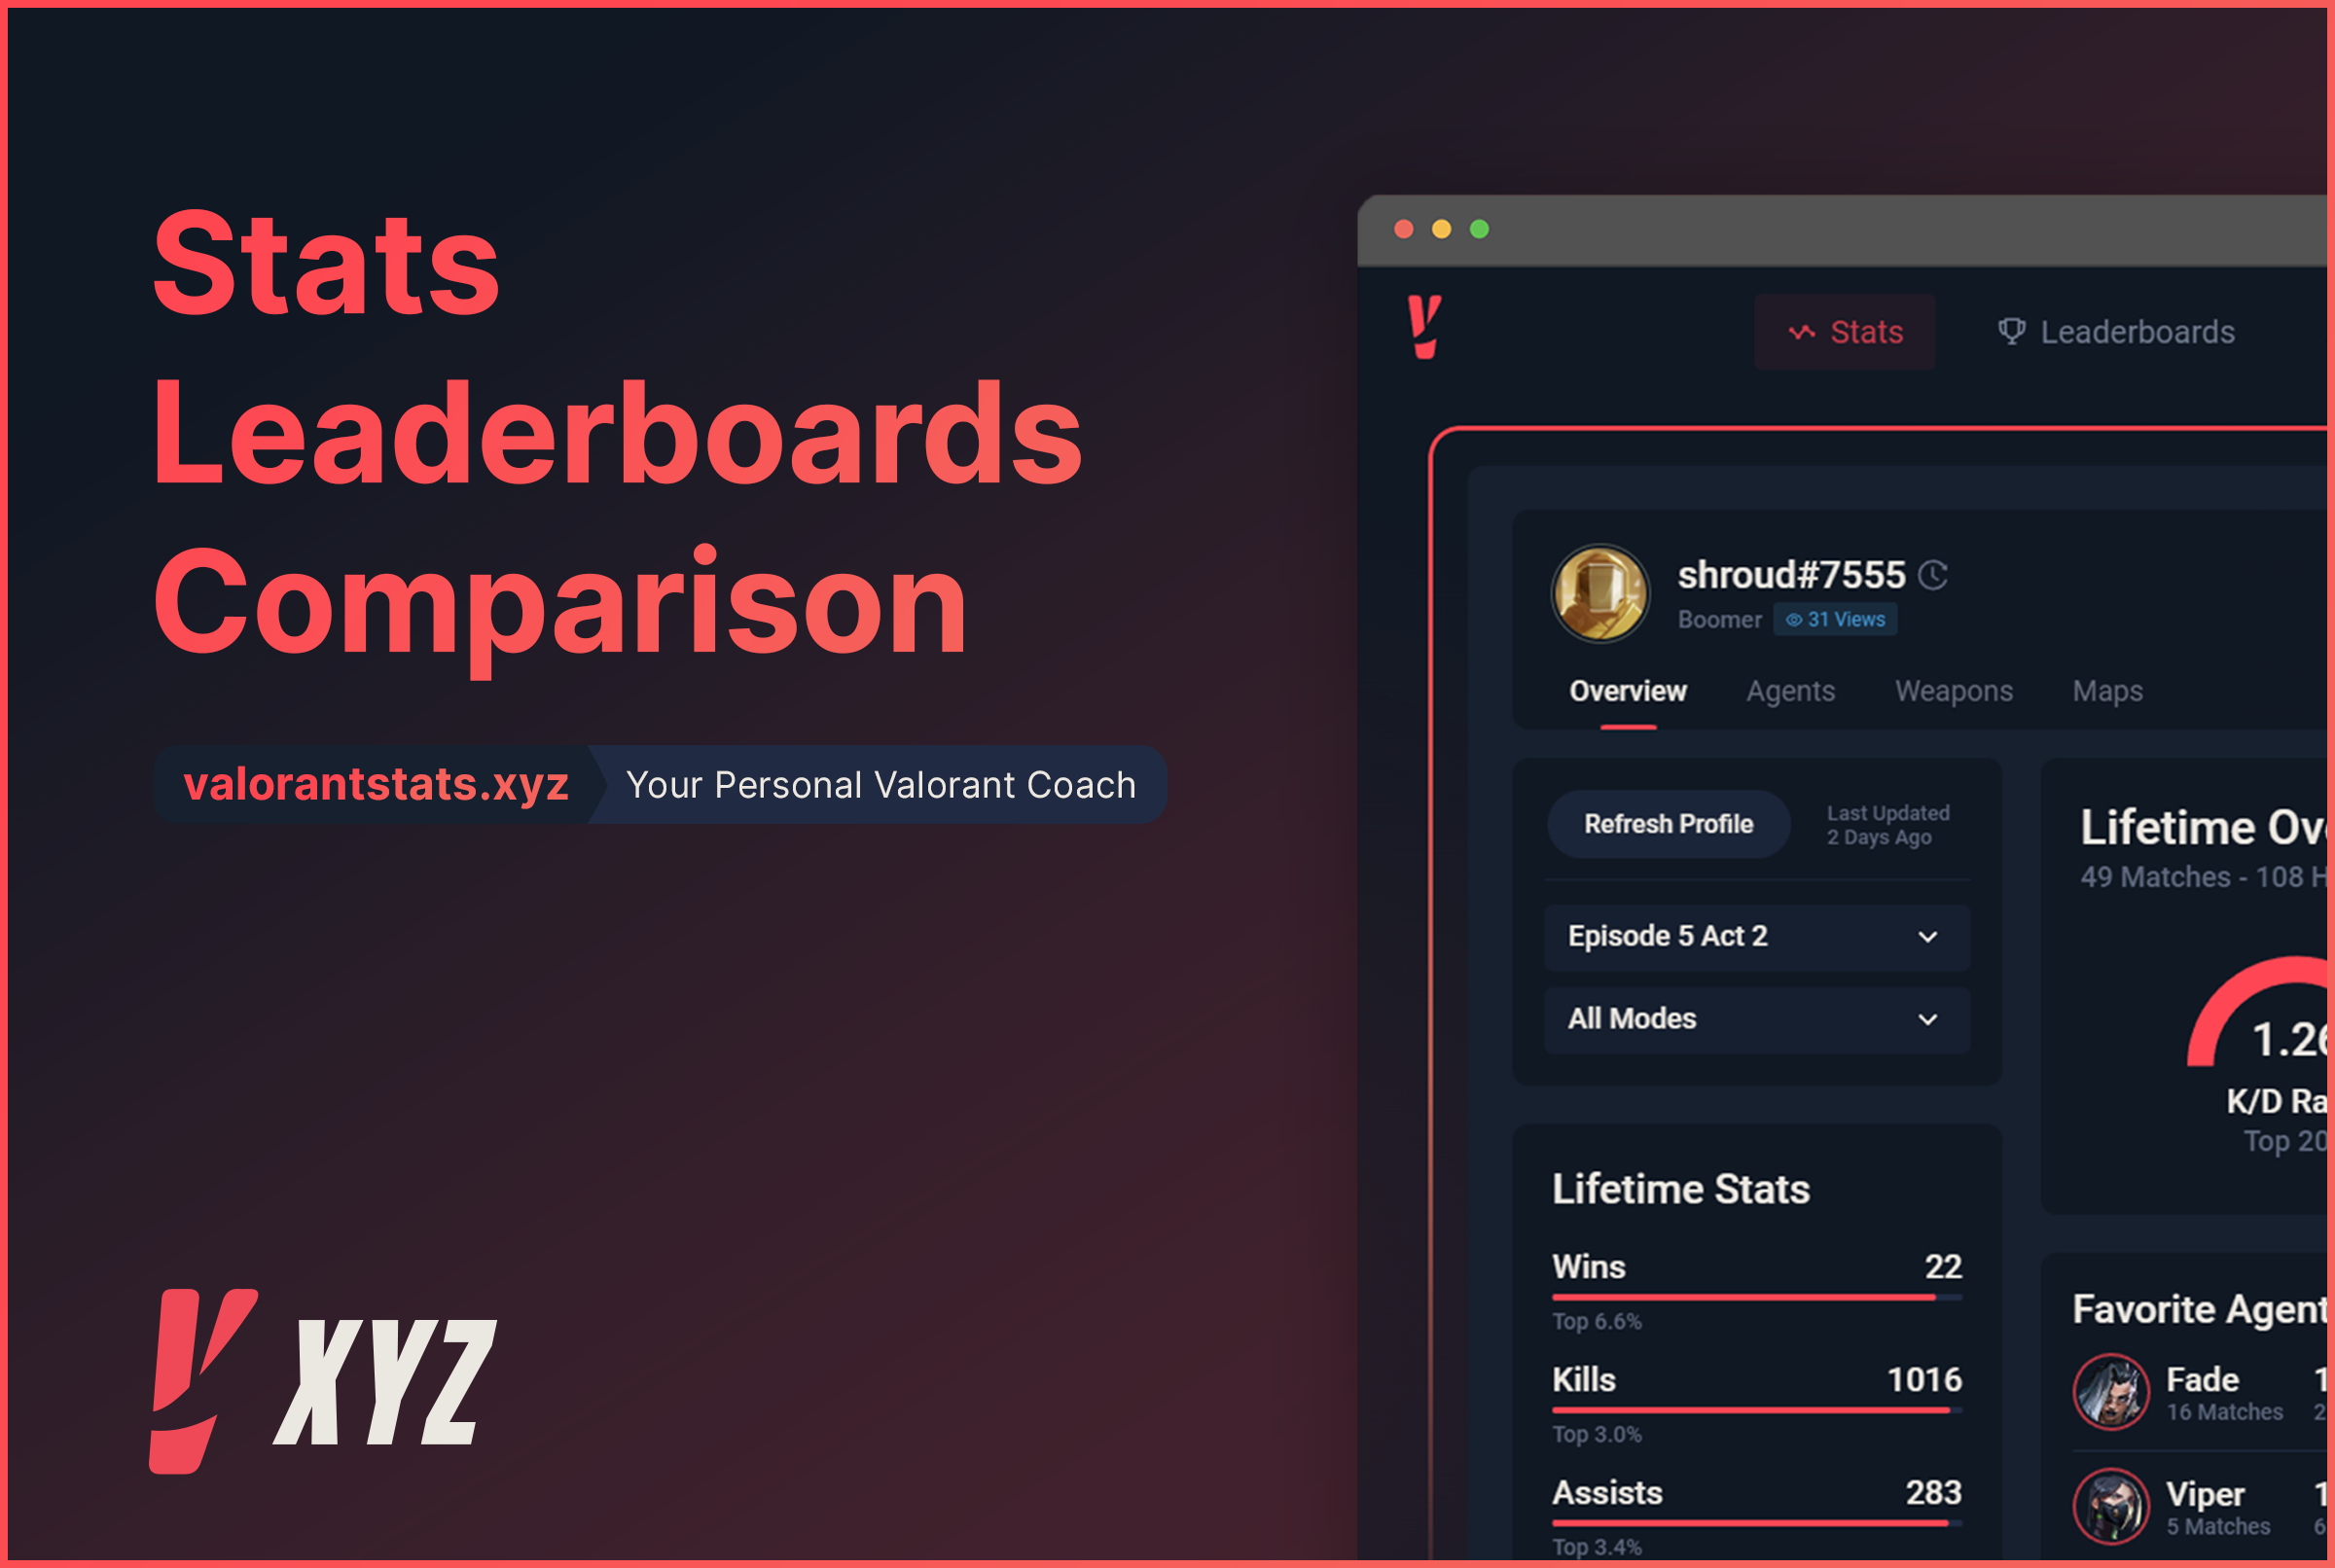 How To Check Valorant Leaderboard 